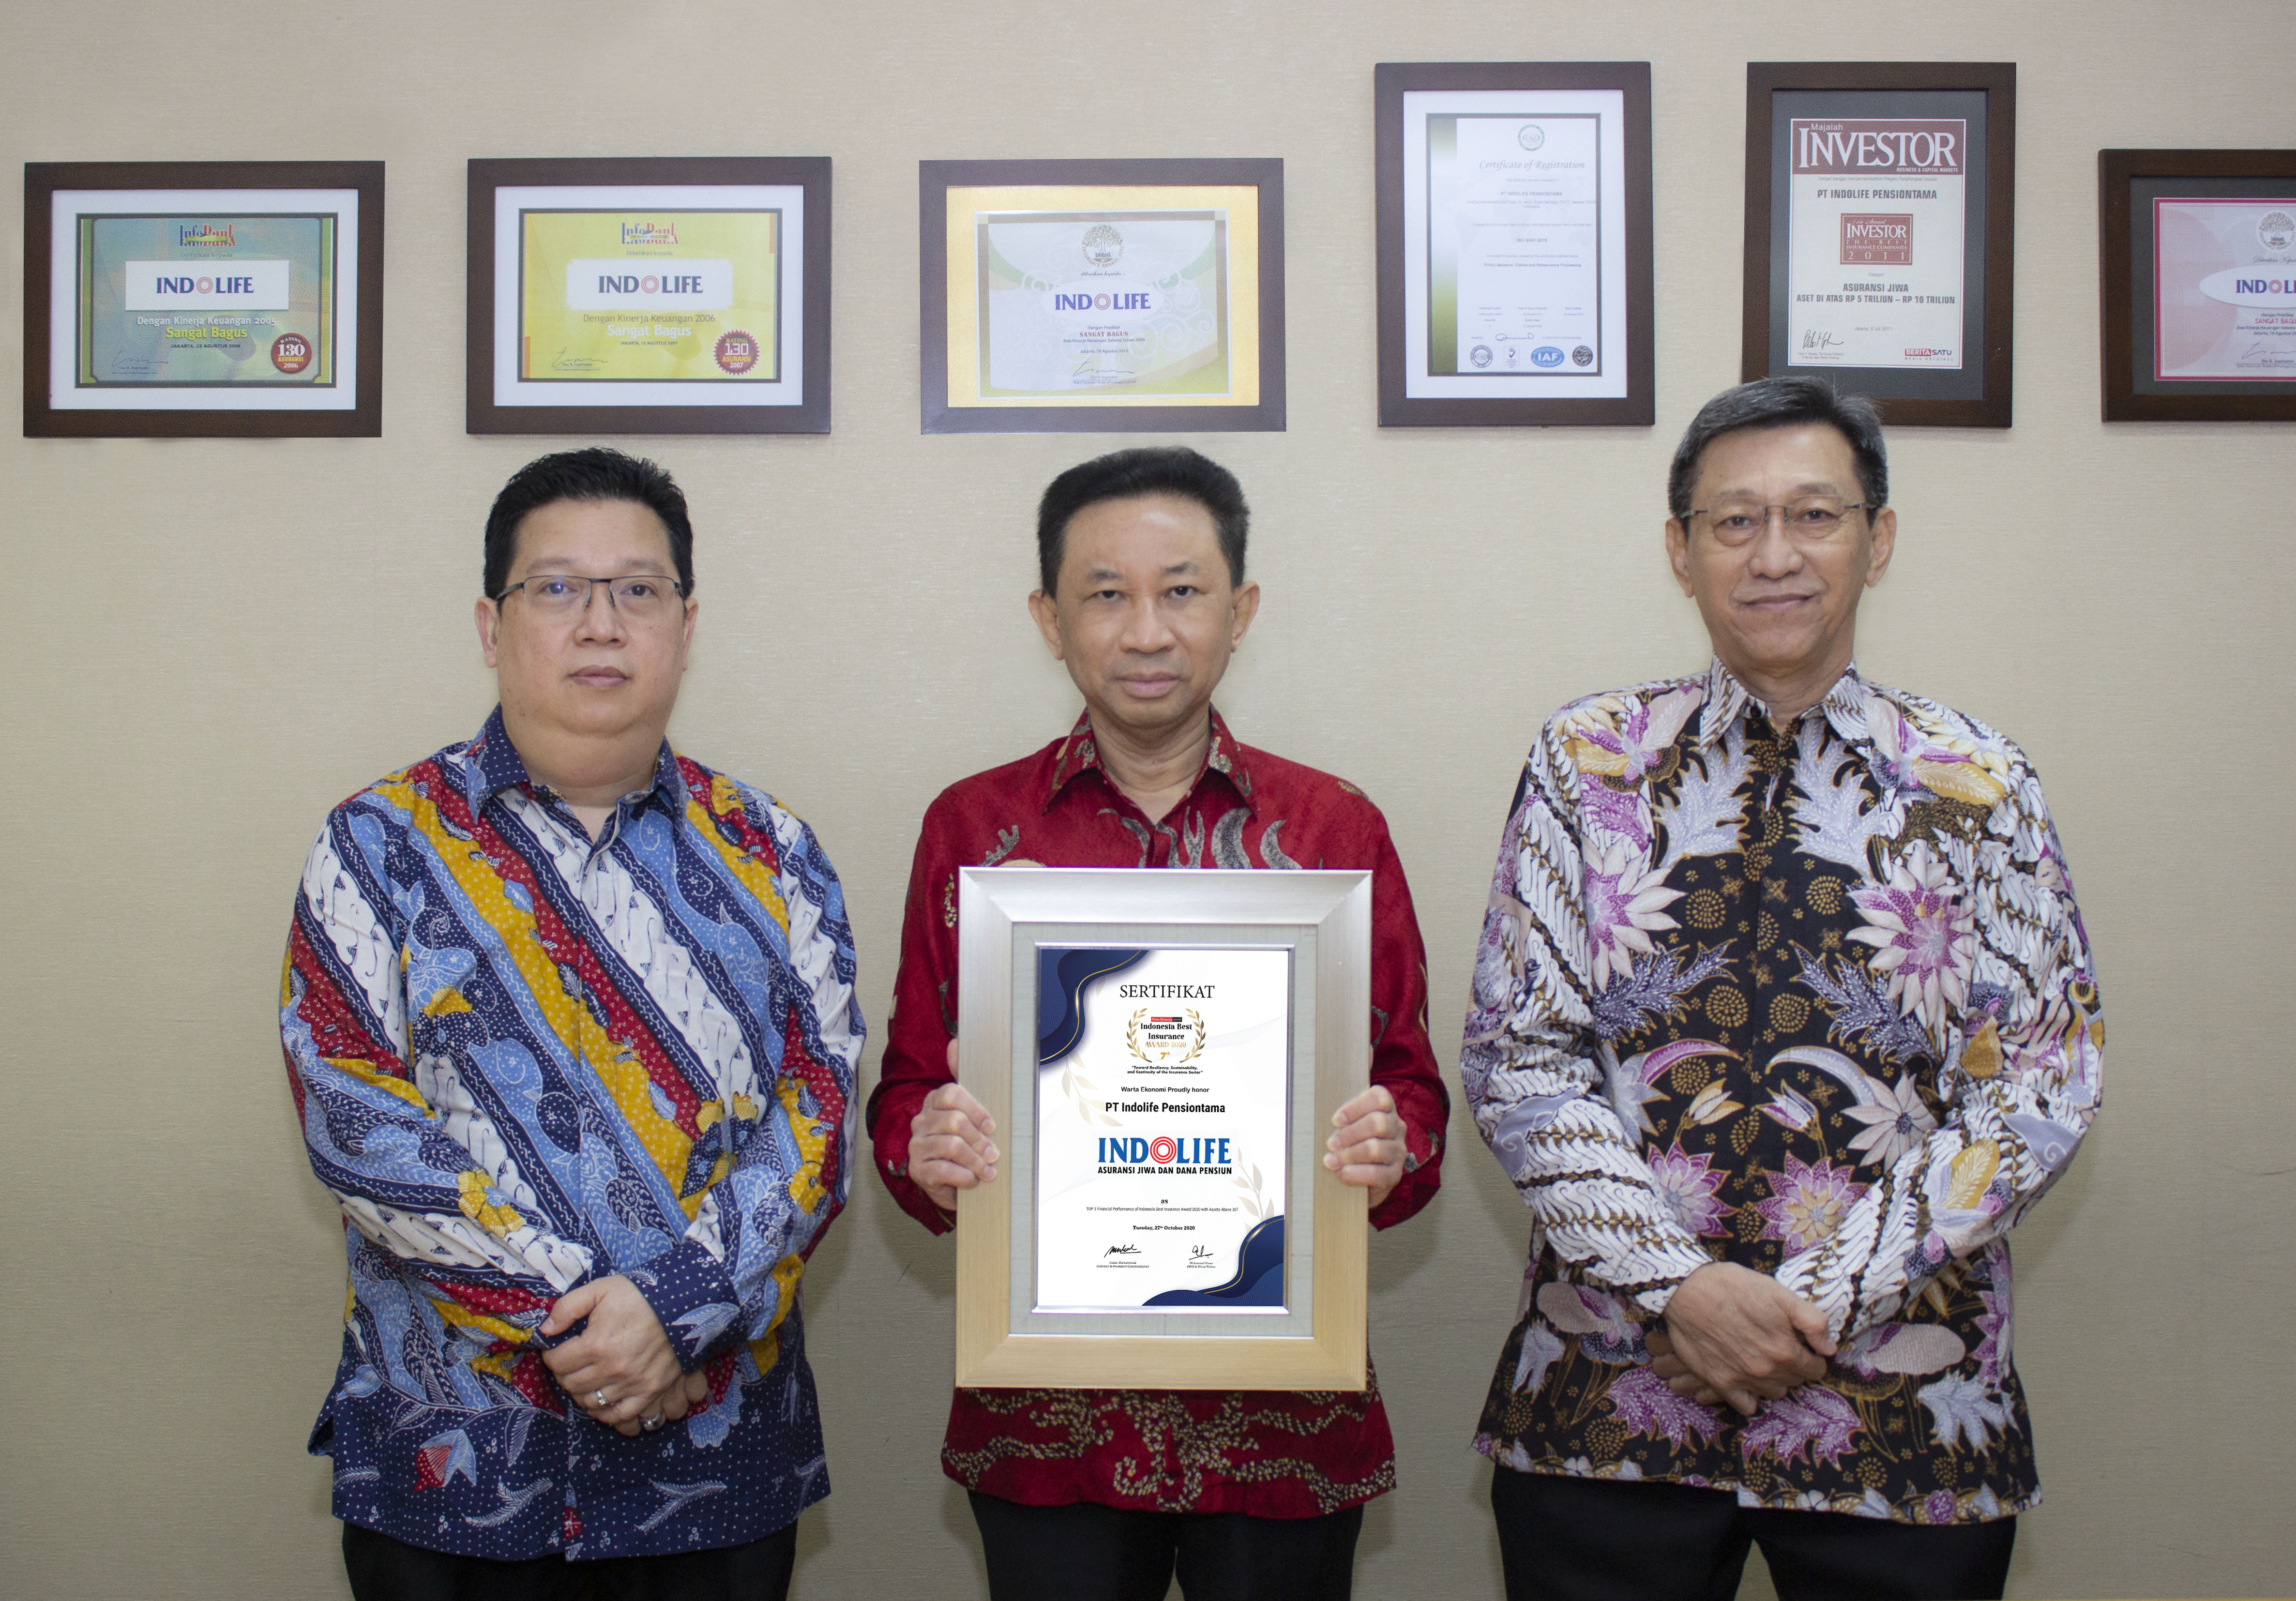 Top 3 Financial Performance of Indonesia Best Insurance Award 2020 with Assets Above 30T